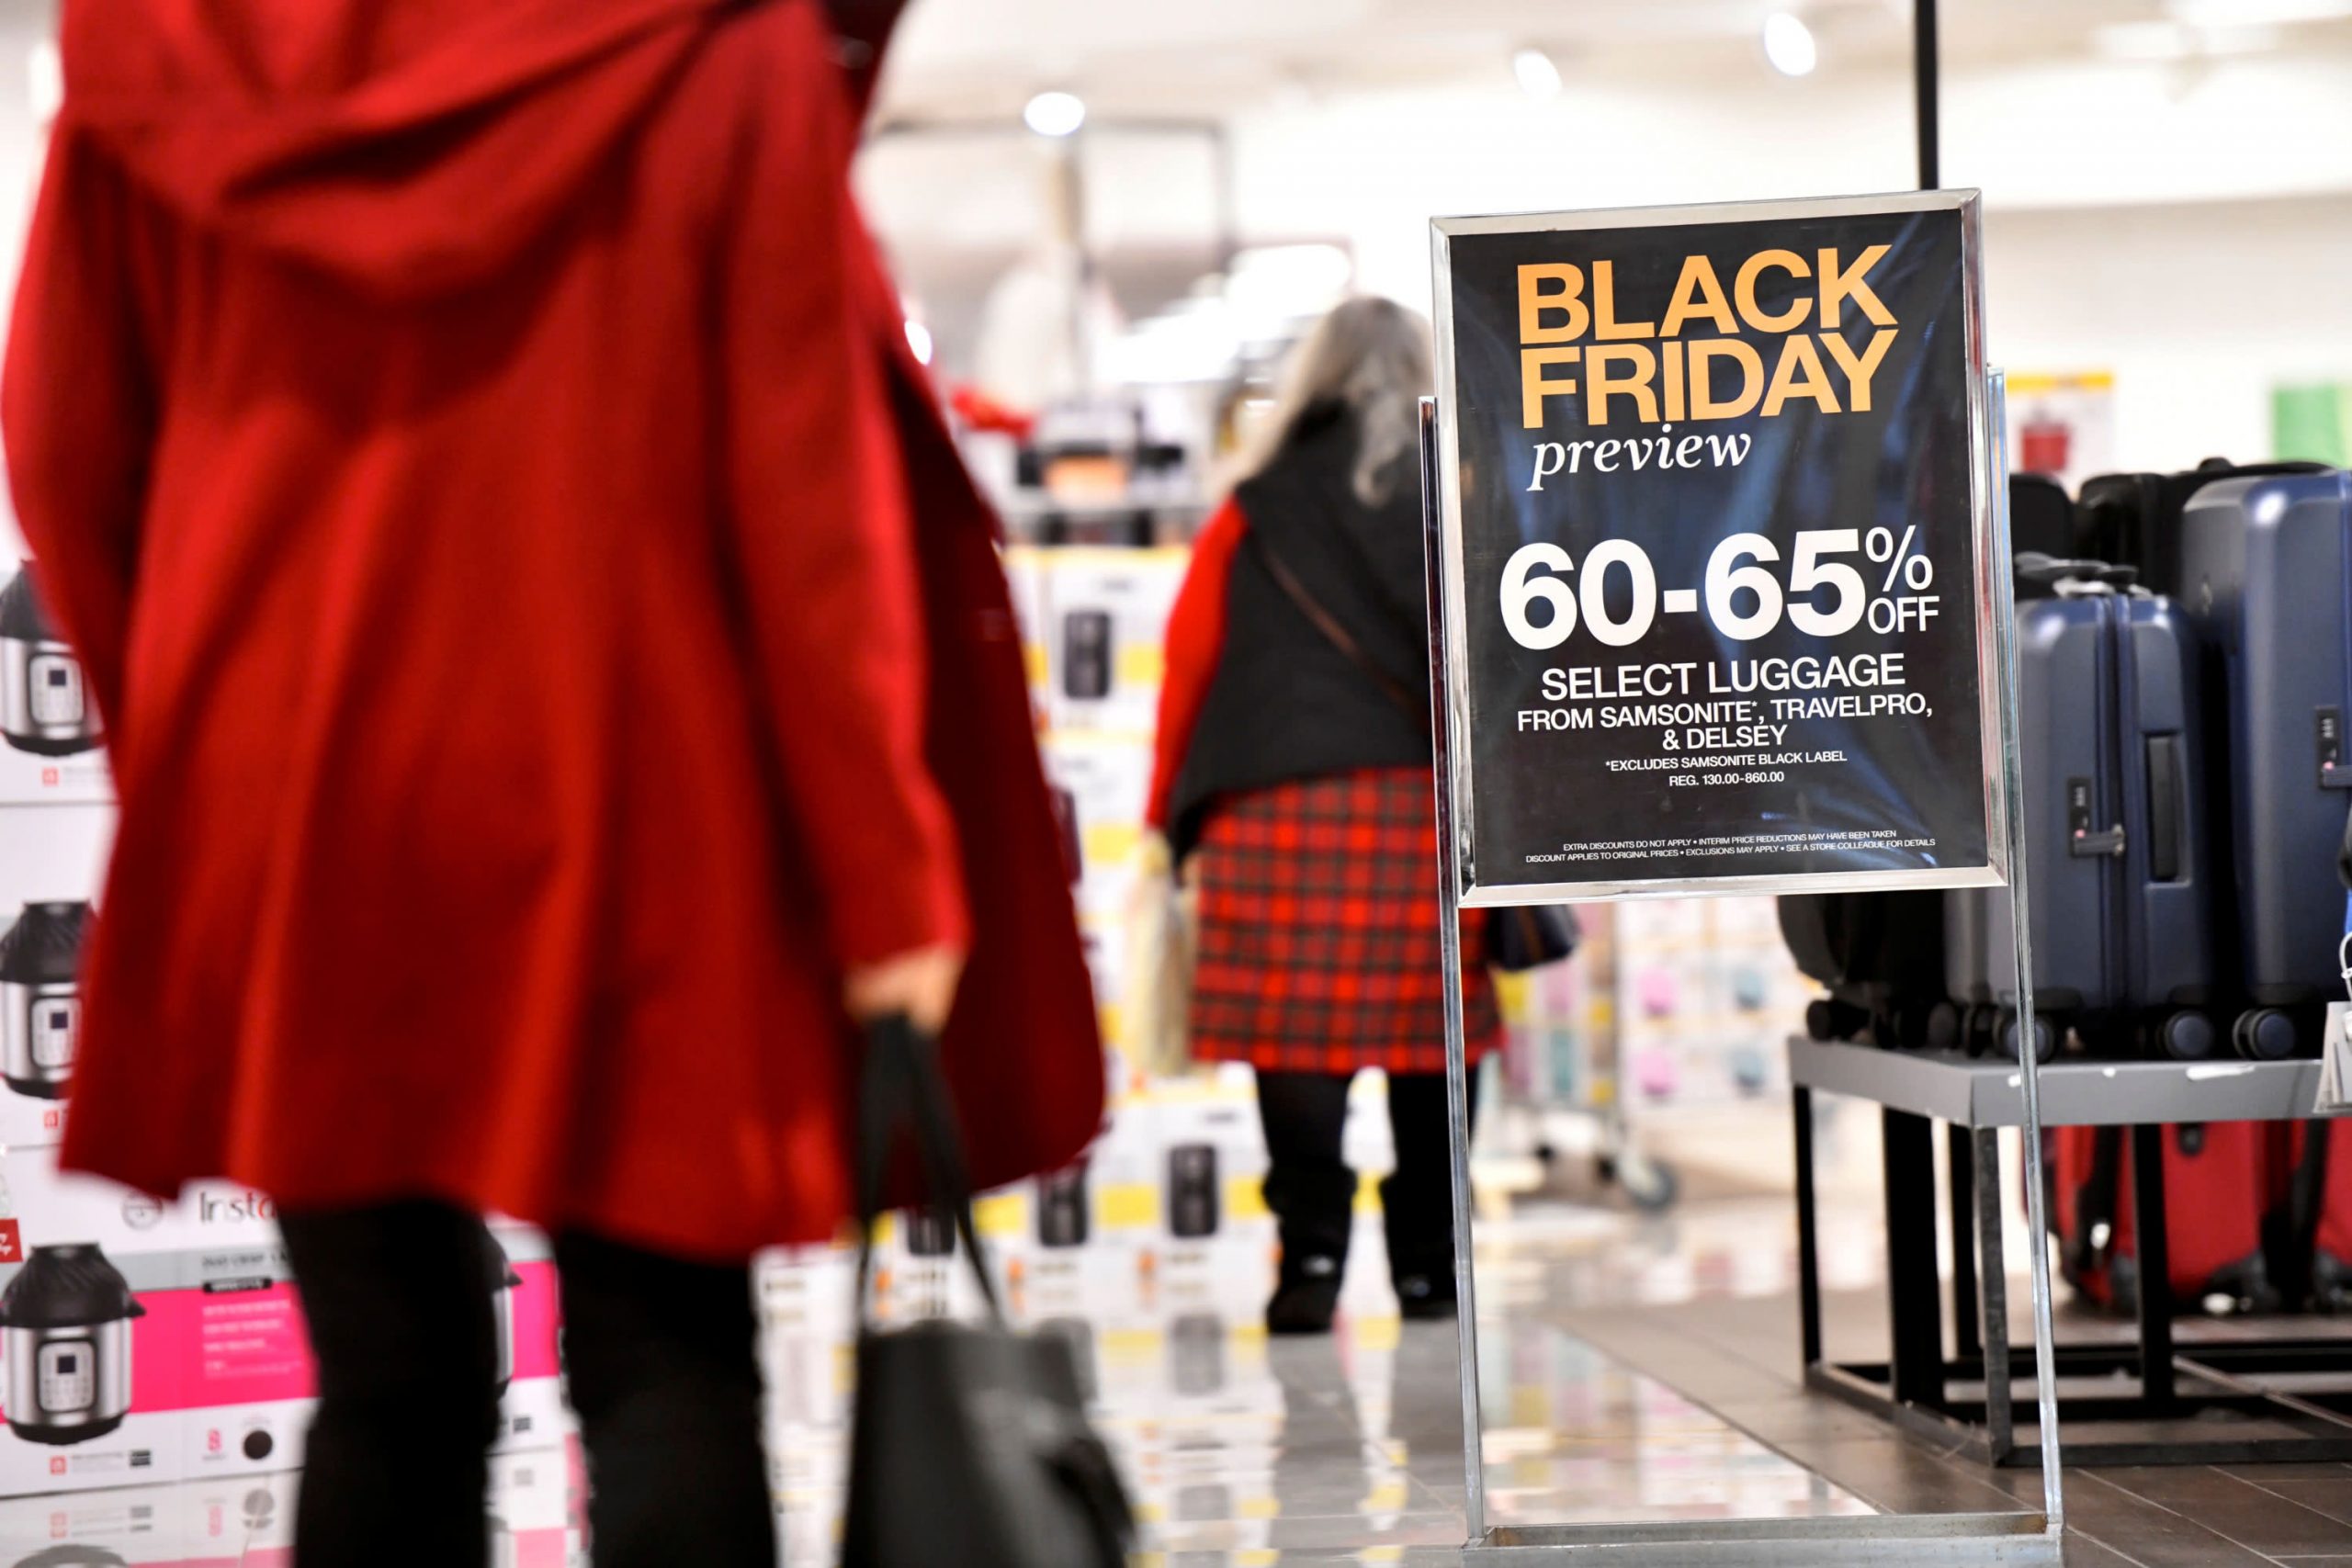 9 Items You Should Consider If Buying On Black Friday – Black Friday Bad Deals